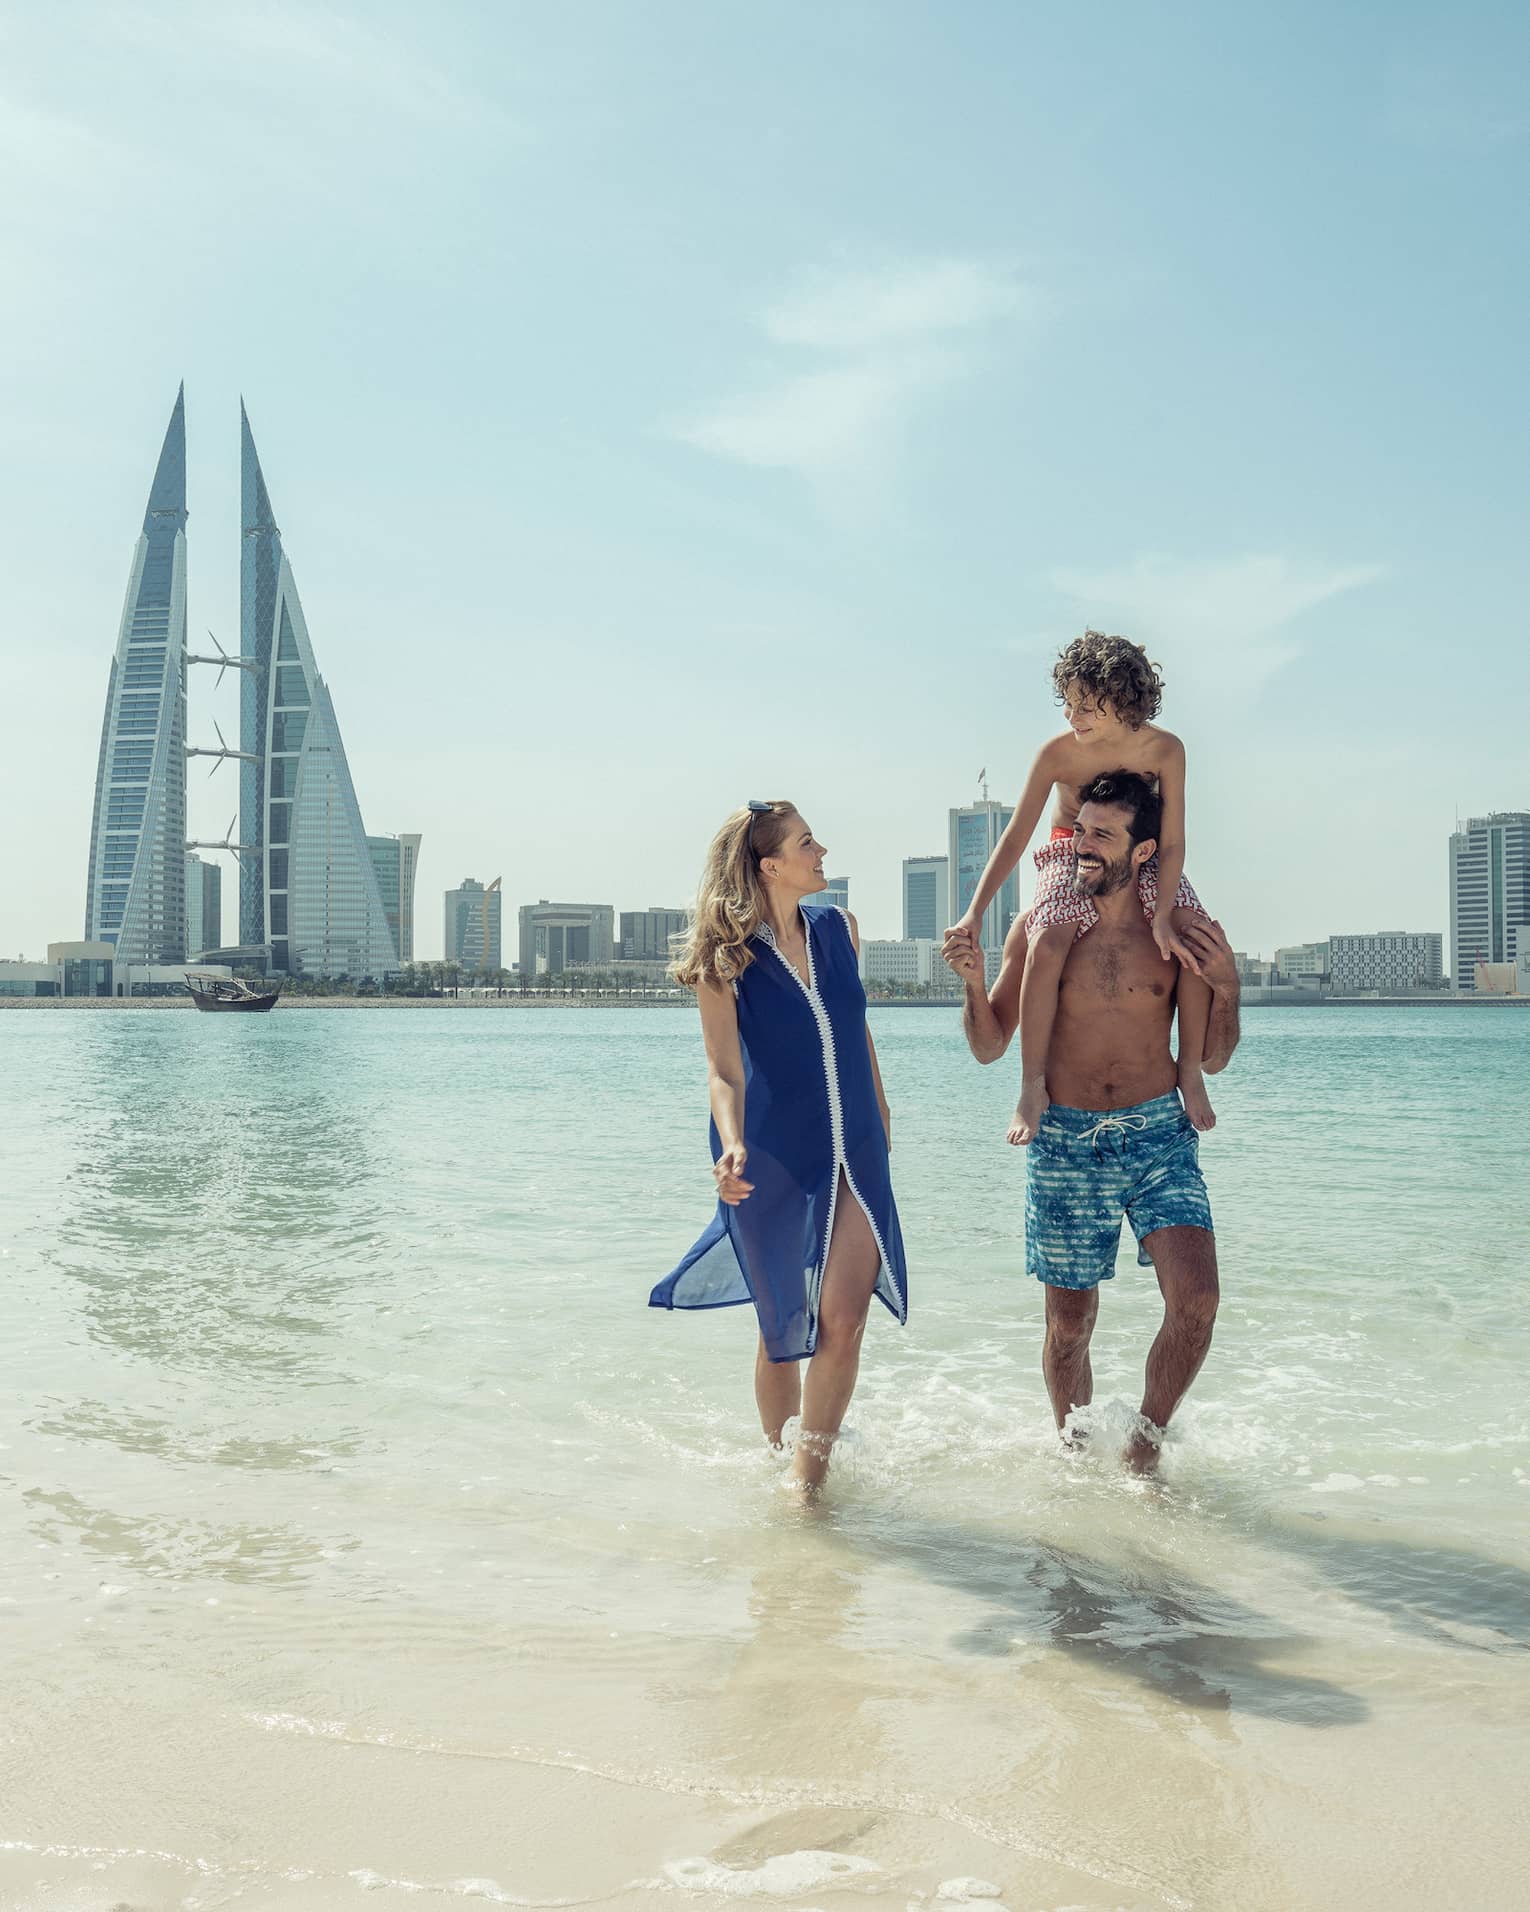 A man with a teenager on his shoulders walks with a woman through shallow ocean water with the city of Bahrain Bay in the background 